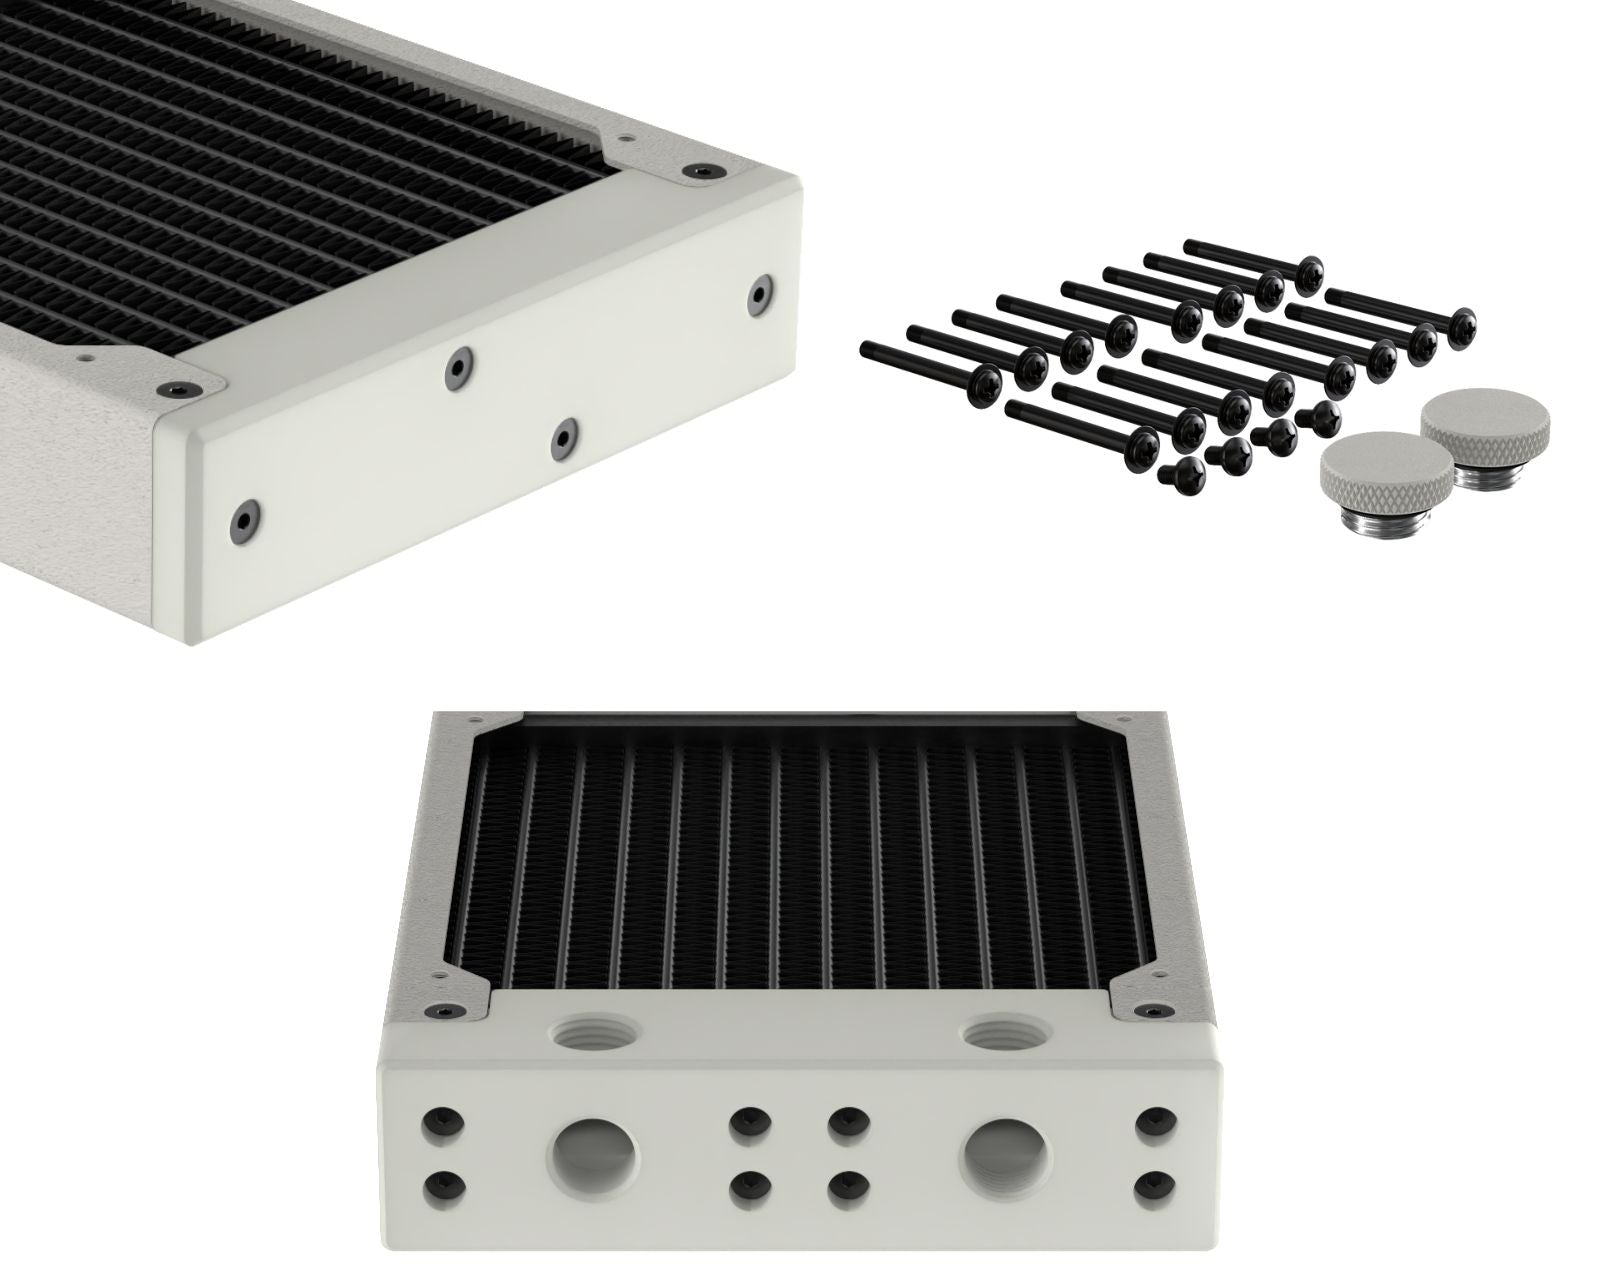 PrimoChill 480SL (30mm) EXIMO Modular Radiator, White POM, 4x120mm, Quad Fan (R-SL-W48) Available in 20+ Colors, Assembled in USA and Custom Watercooling Loop Ready - TX Matte Silver